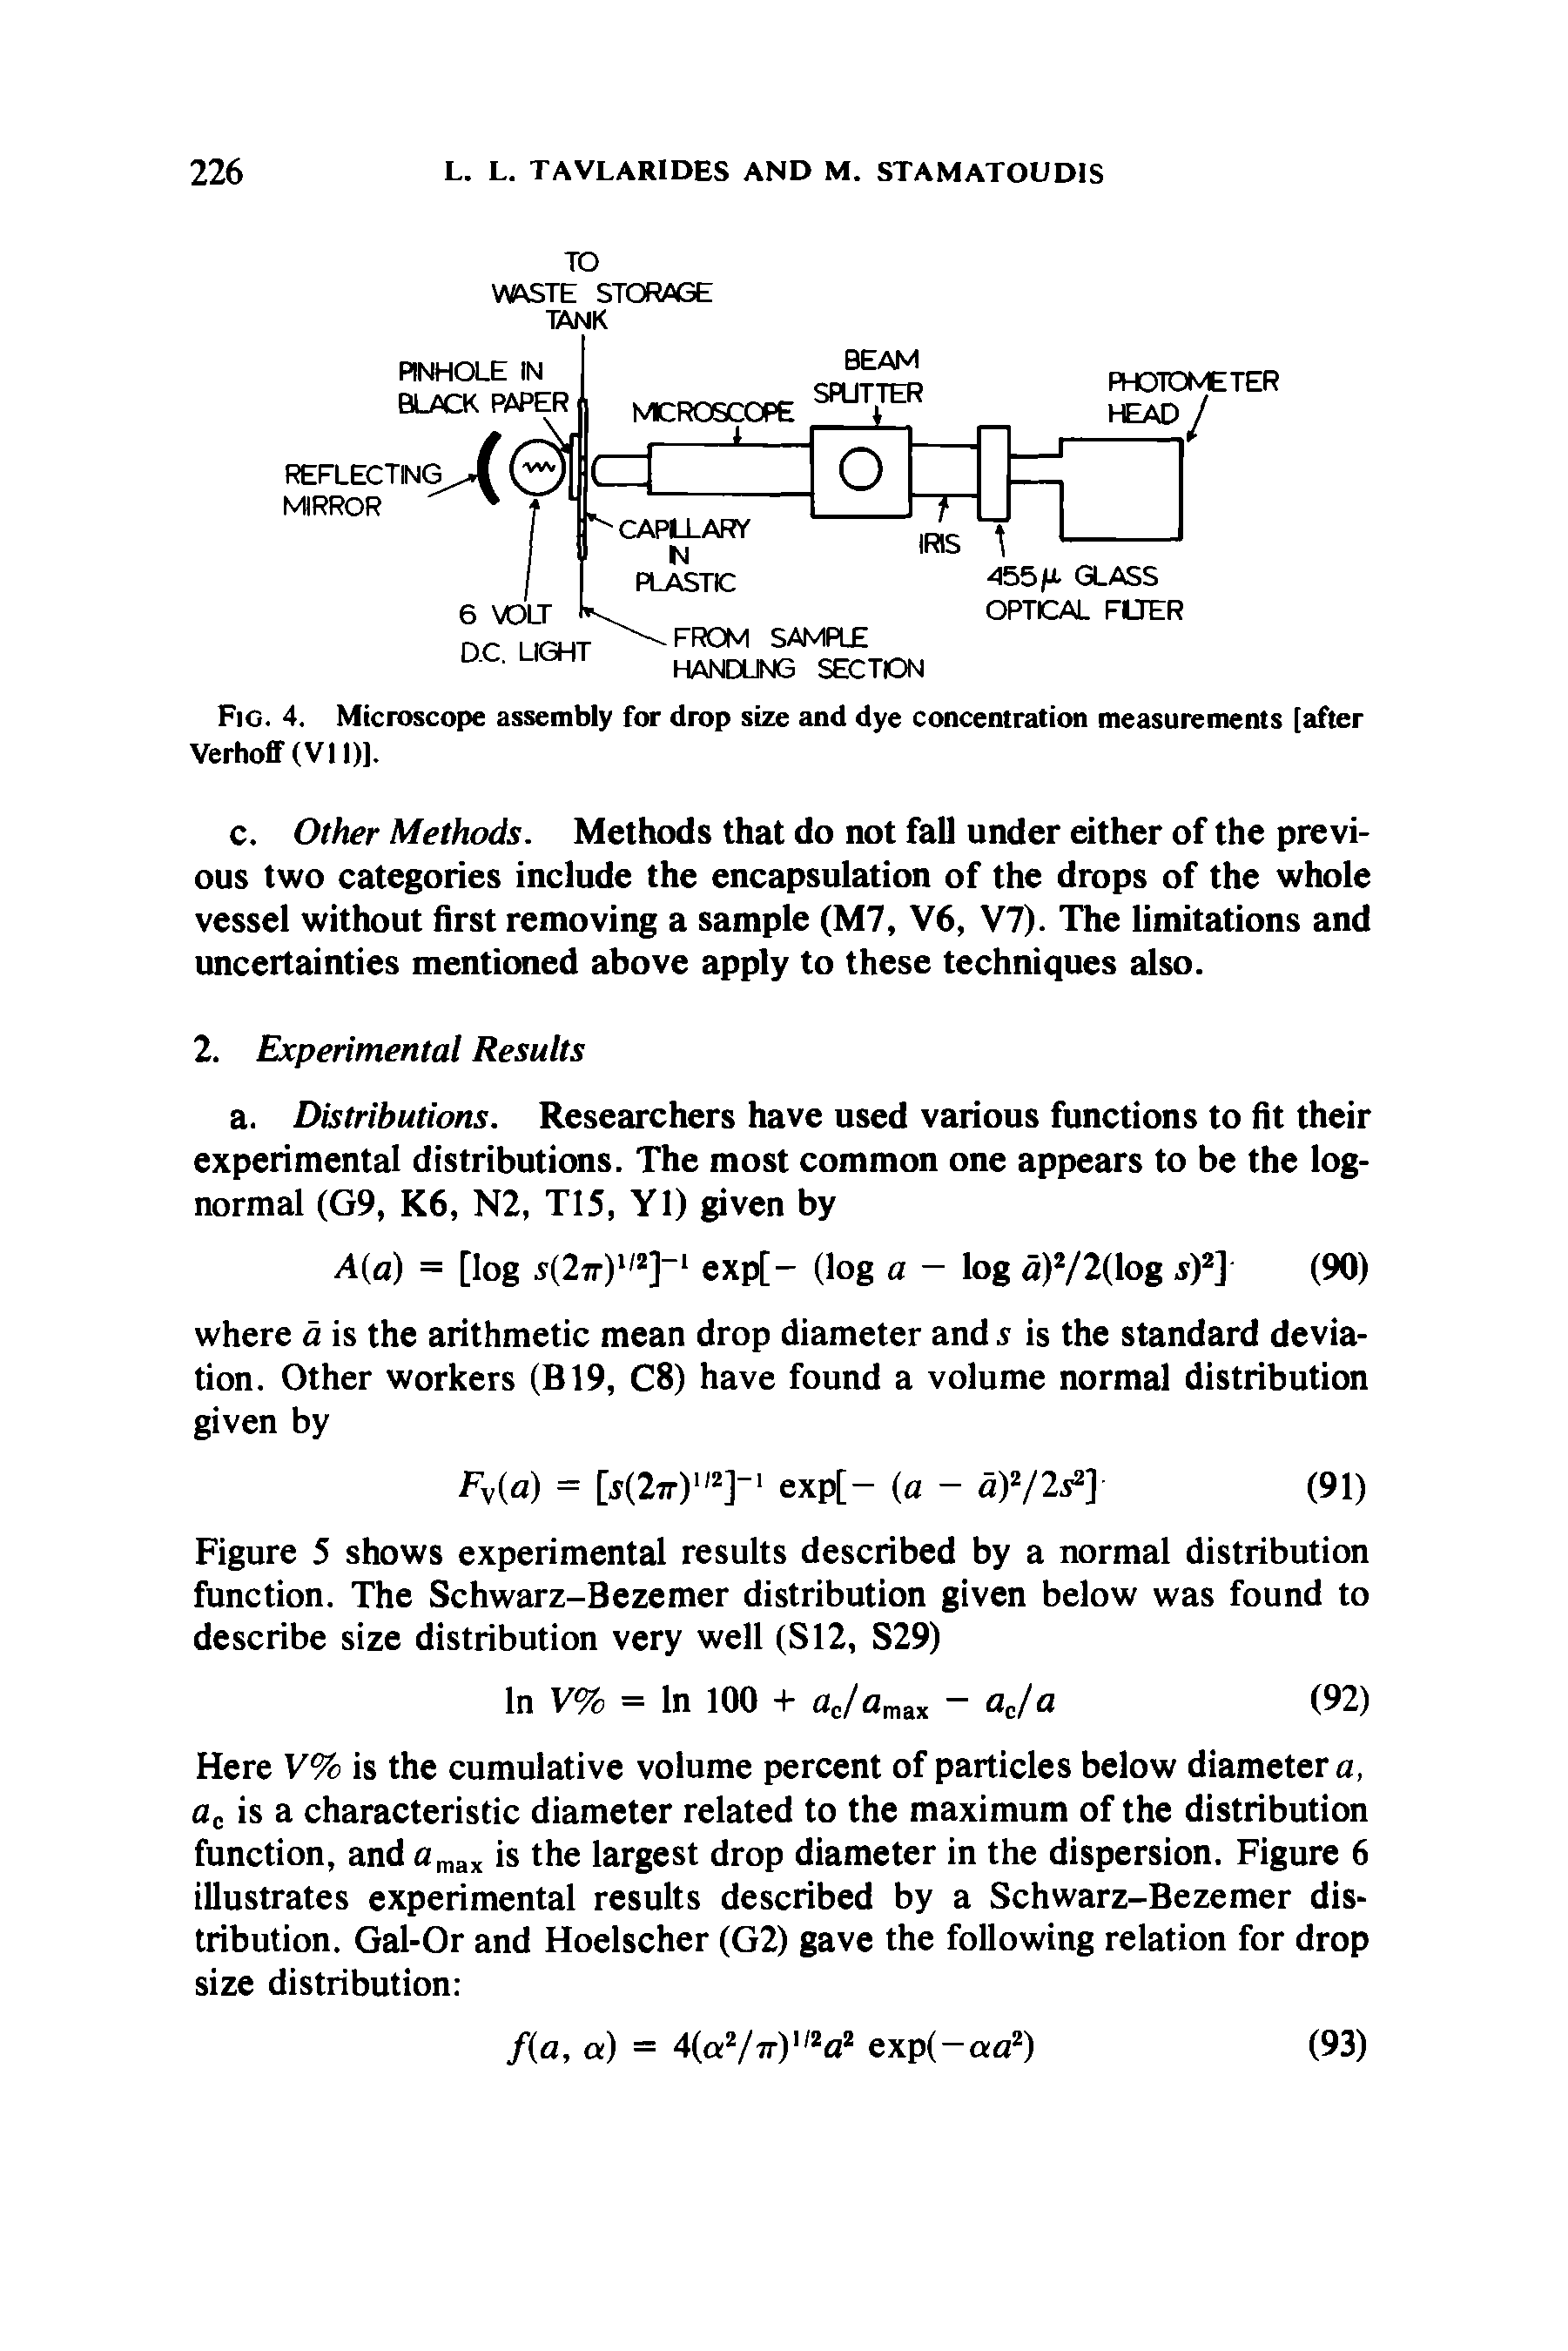 Fig. 4. Microscope assembly for drop size and dye concentration measurements [after VerhofF(VII)].